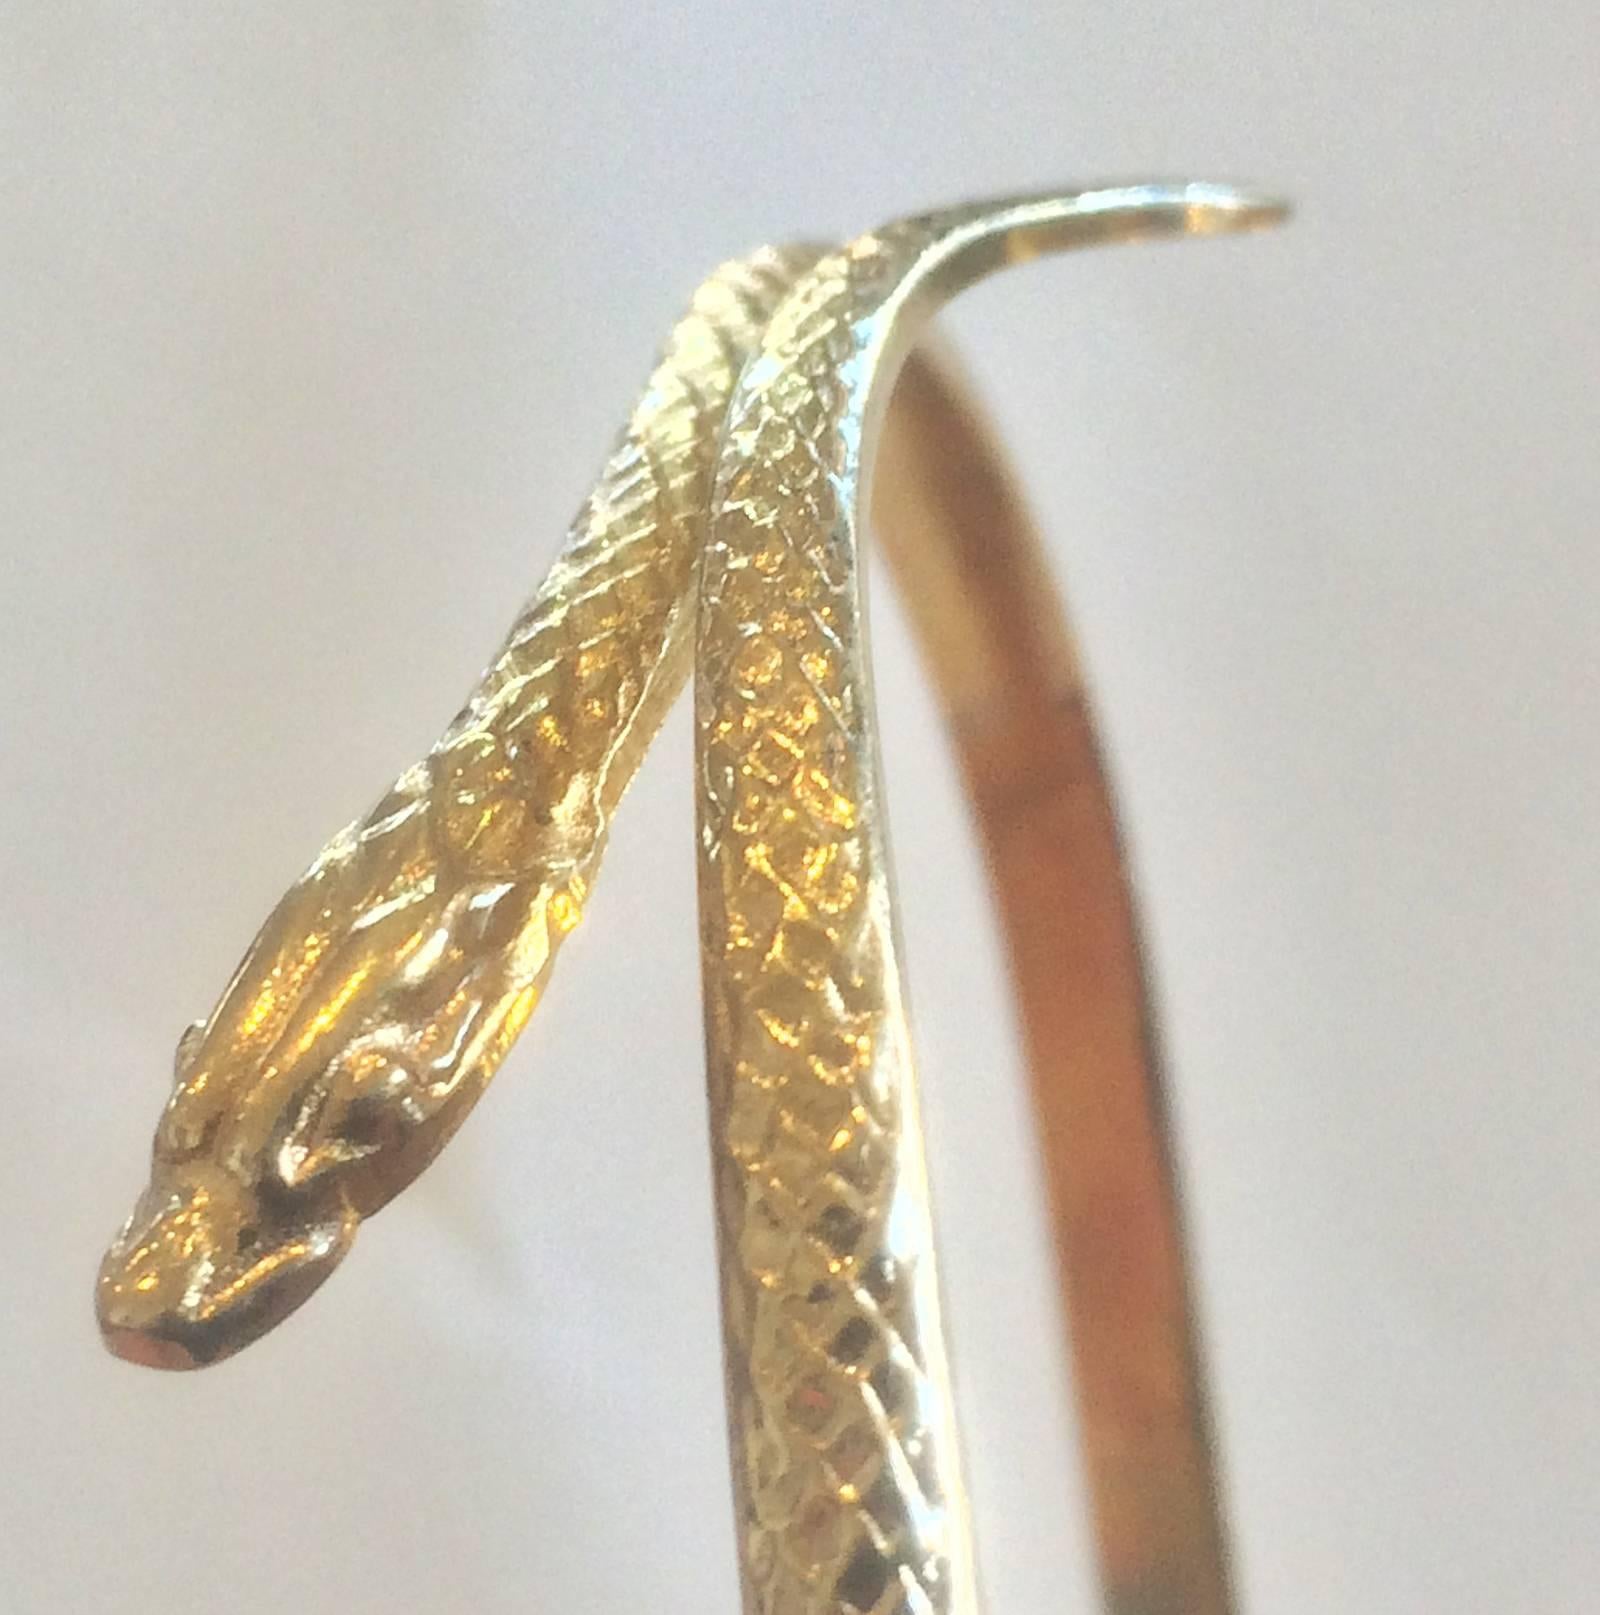 Art Deco Bangle or Cuff in Gold, in the form of a Snake, Hallmarked to outside edge, probably a European mark. Head and Tail are separated so the size is adjustable, smaller or larger, to suit fitting. Excellent condition and all perfect. Tests as